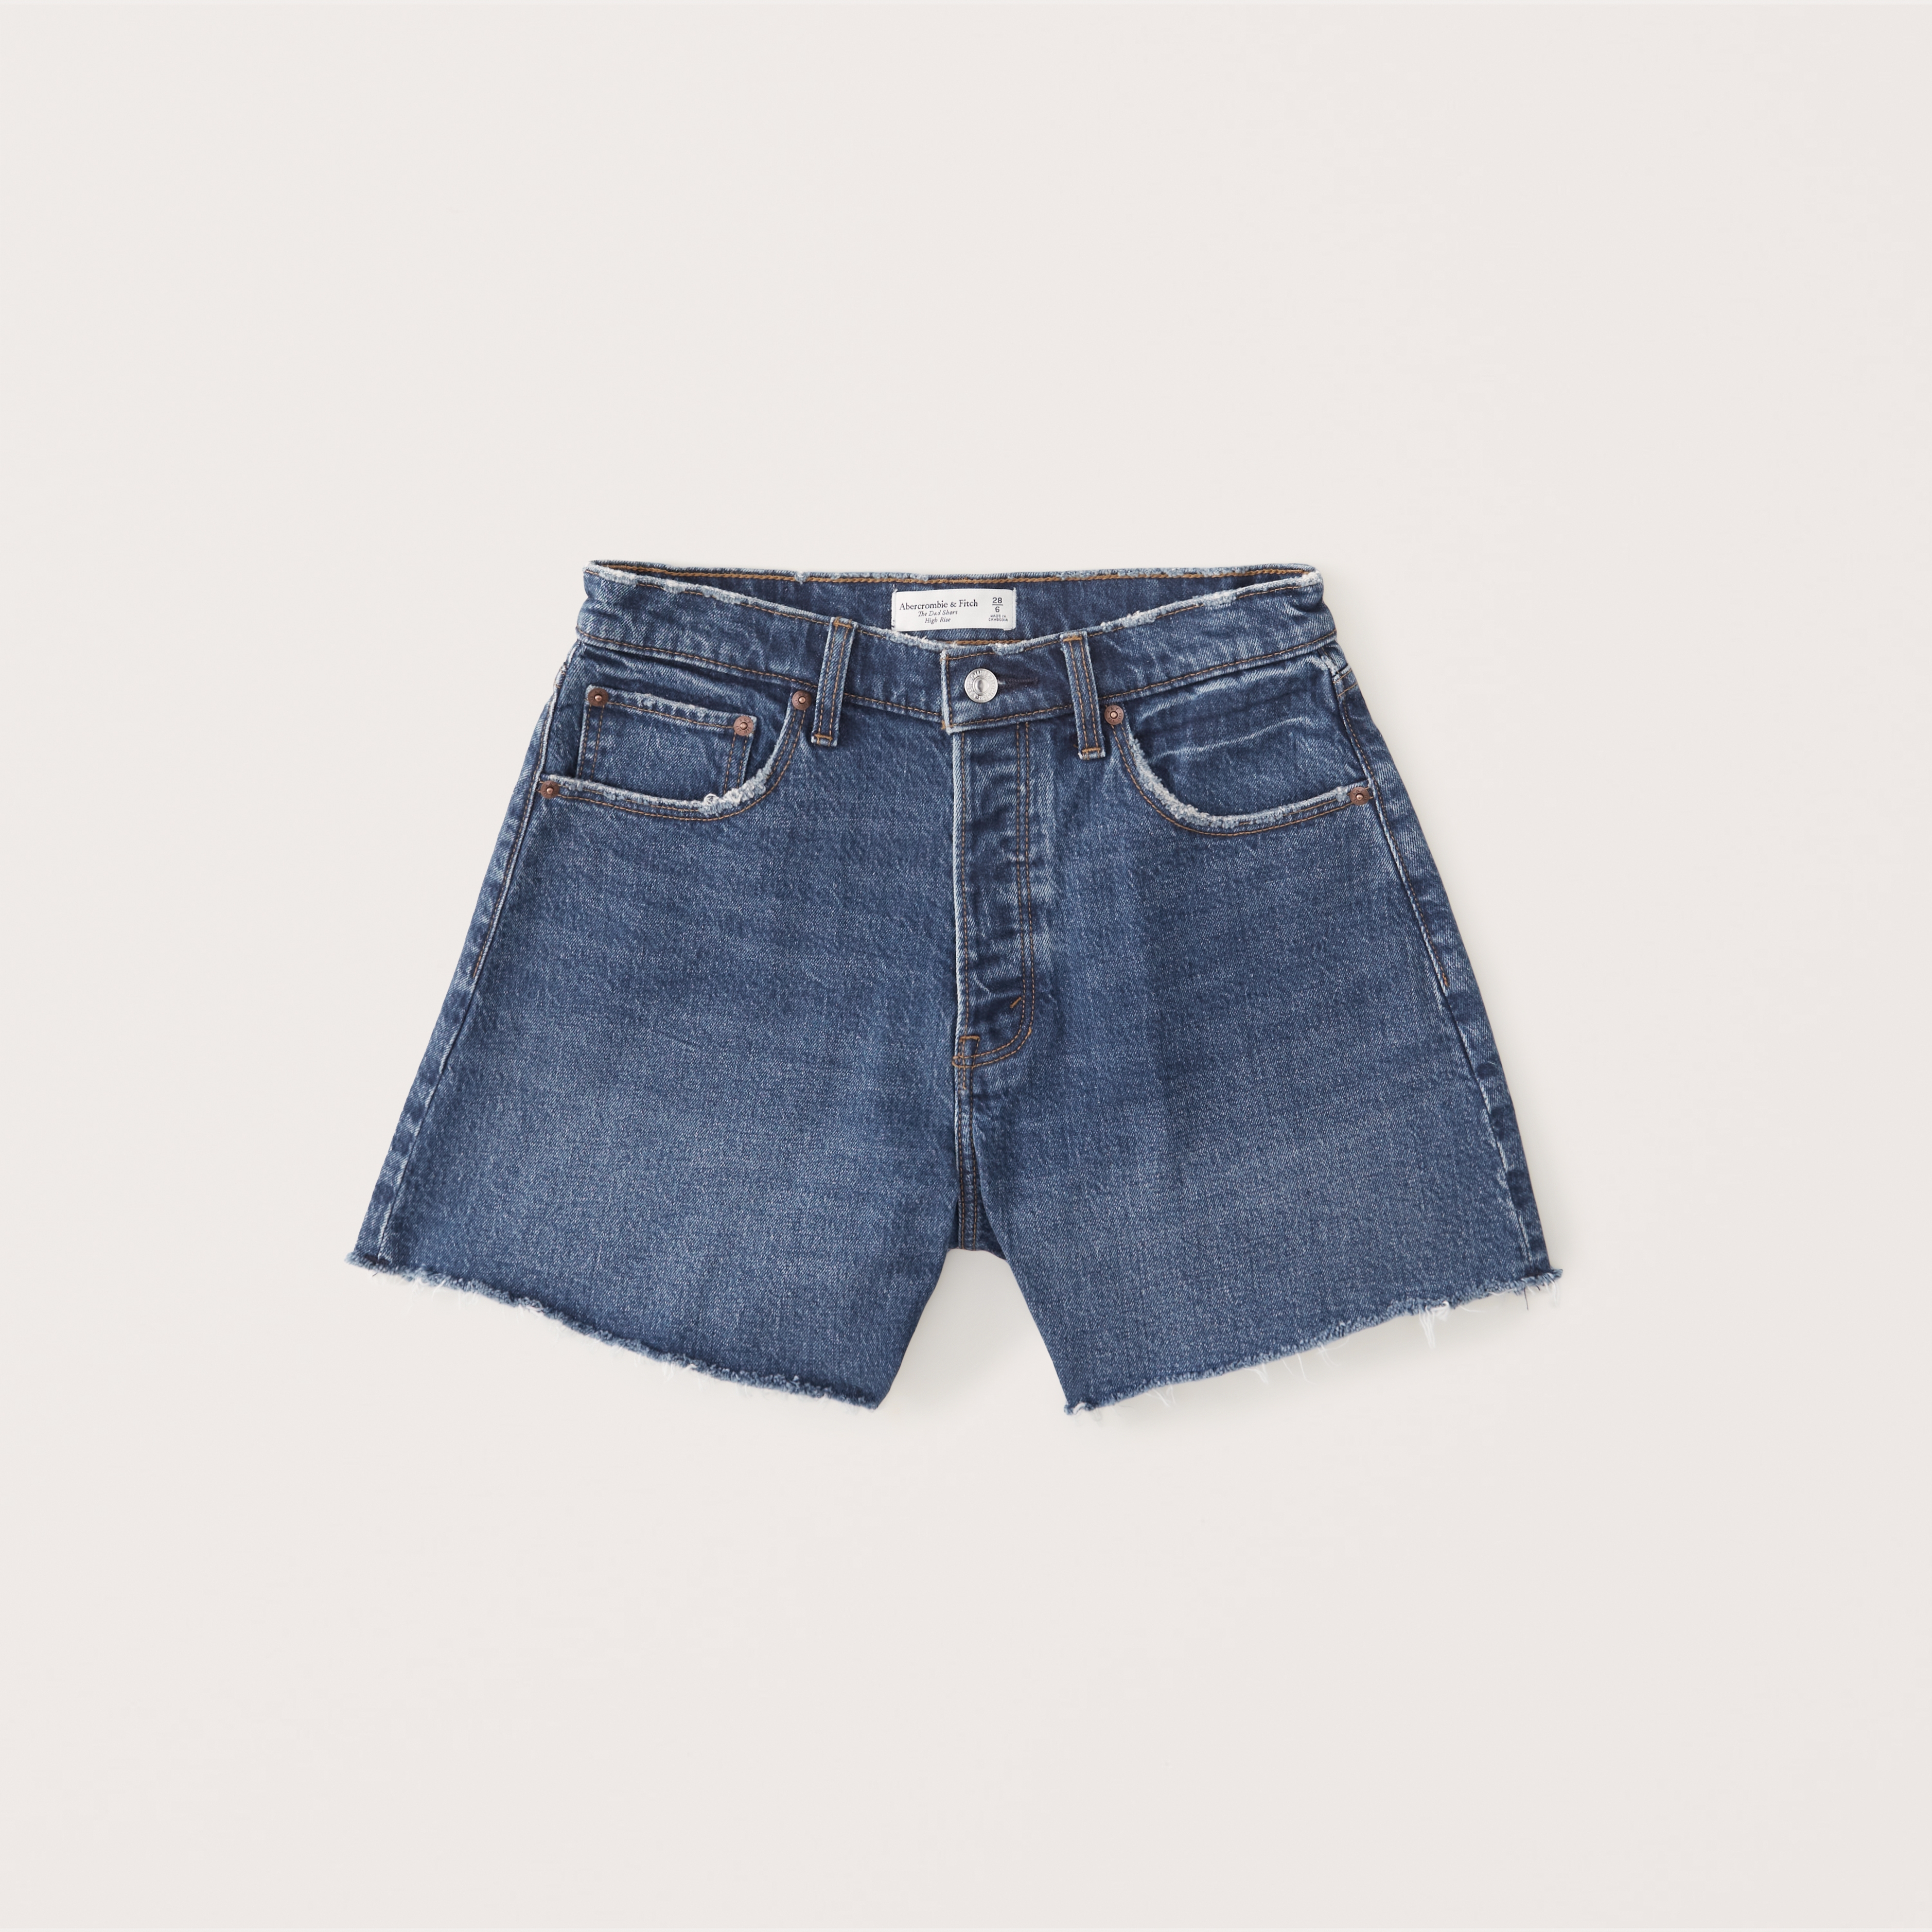 The Denim Shorts Our Editors Swear By